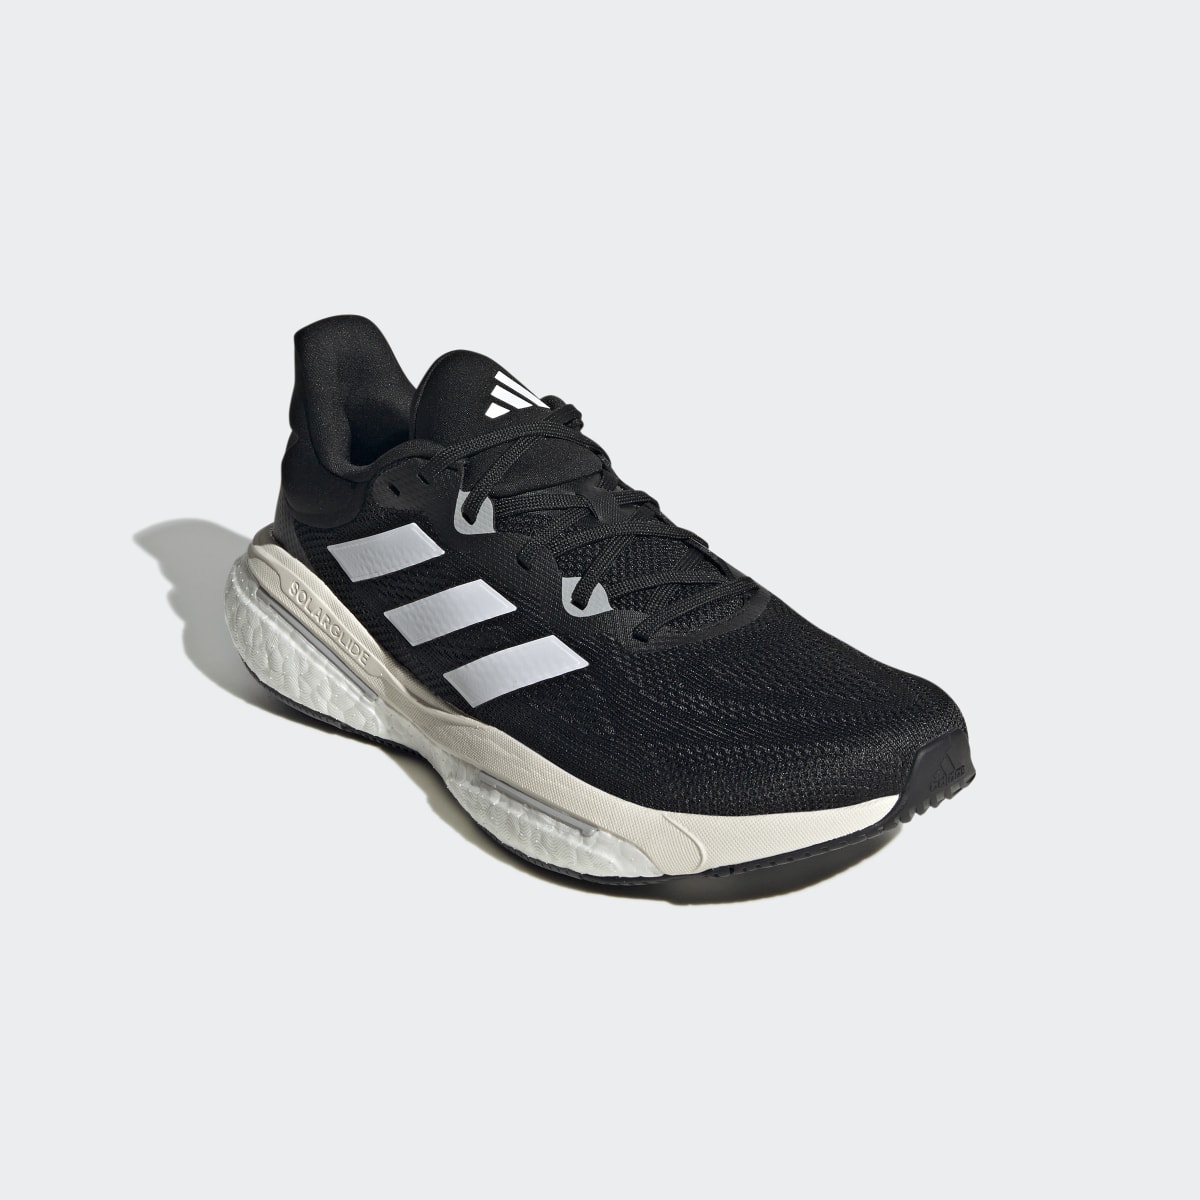 Adidas Solarglide 6 Running Shoes. 5